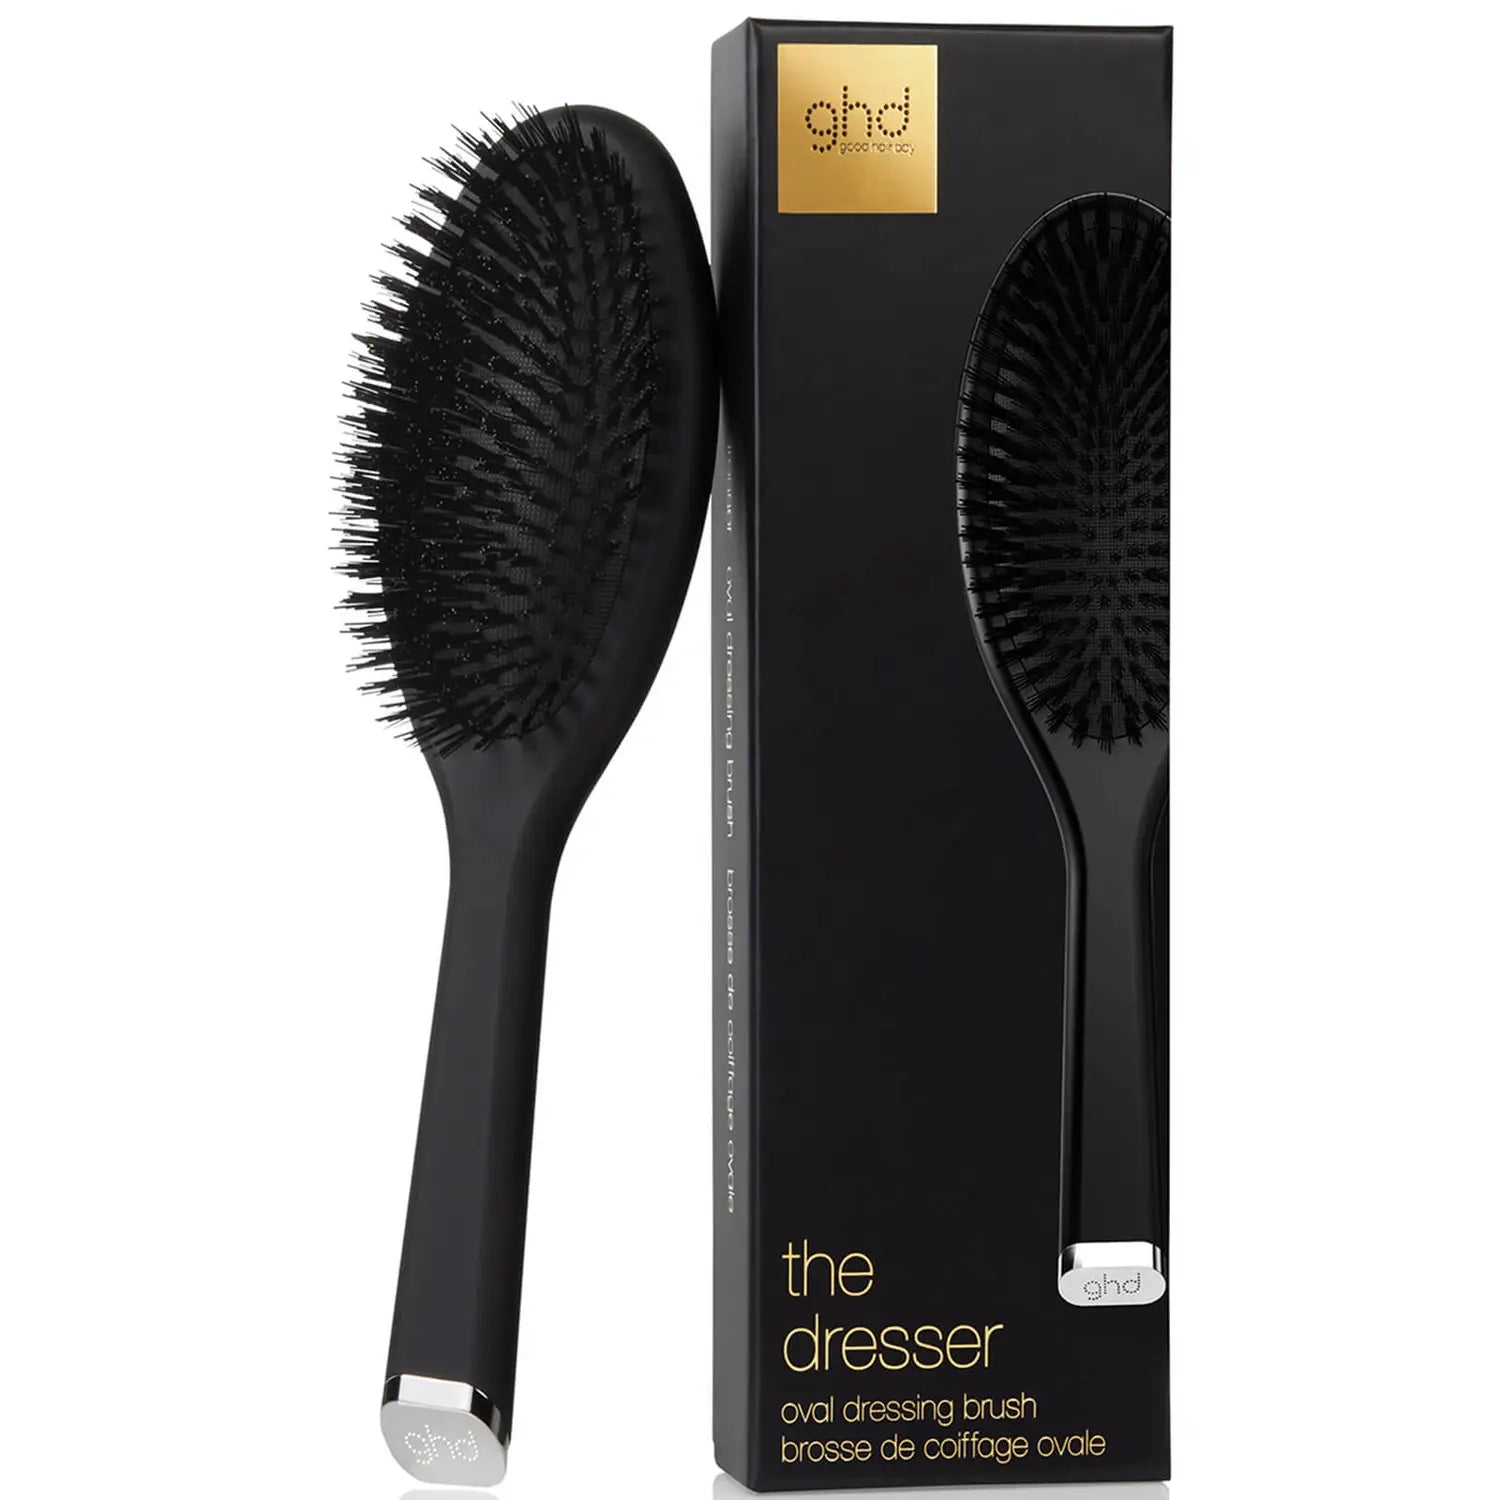 ghd The Dresser - Oval Dressing Brush, with packaging